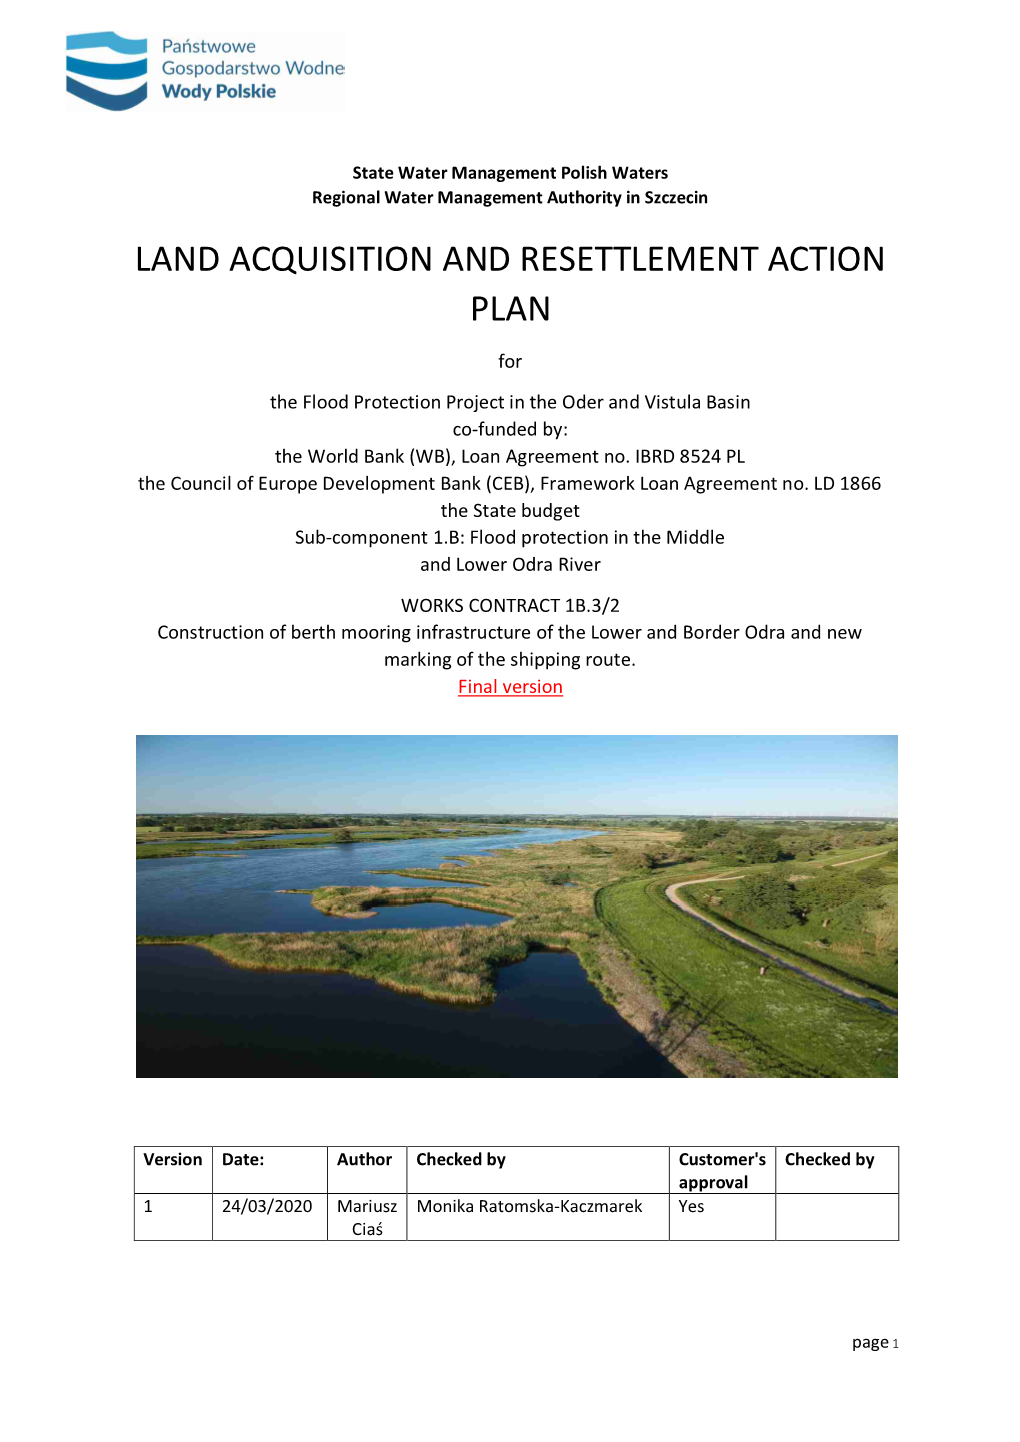 Land Acquisition and Resettlement Action Plan